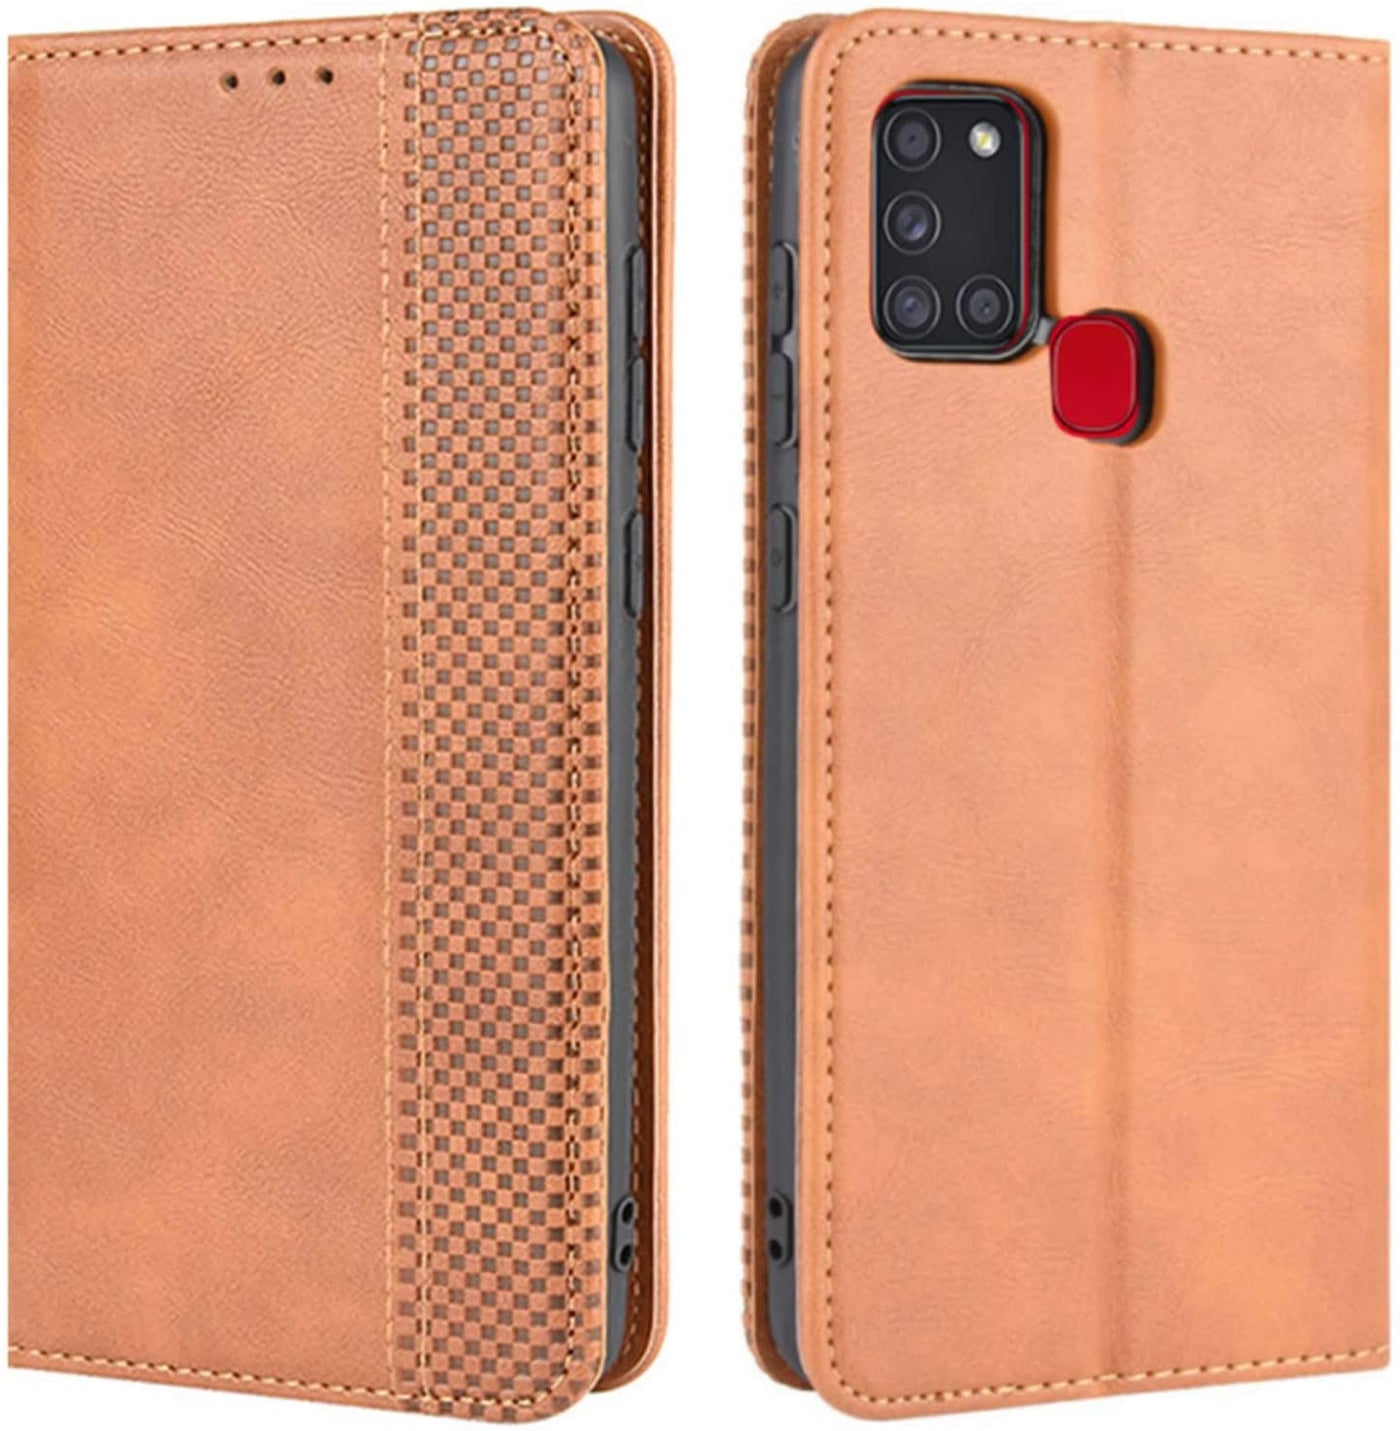 Samsung Galaxy A21s brown color leather wallet flip cover case By excelsior